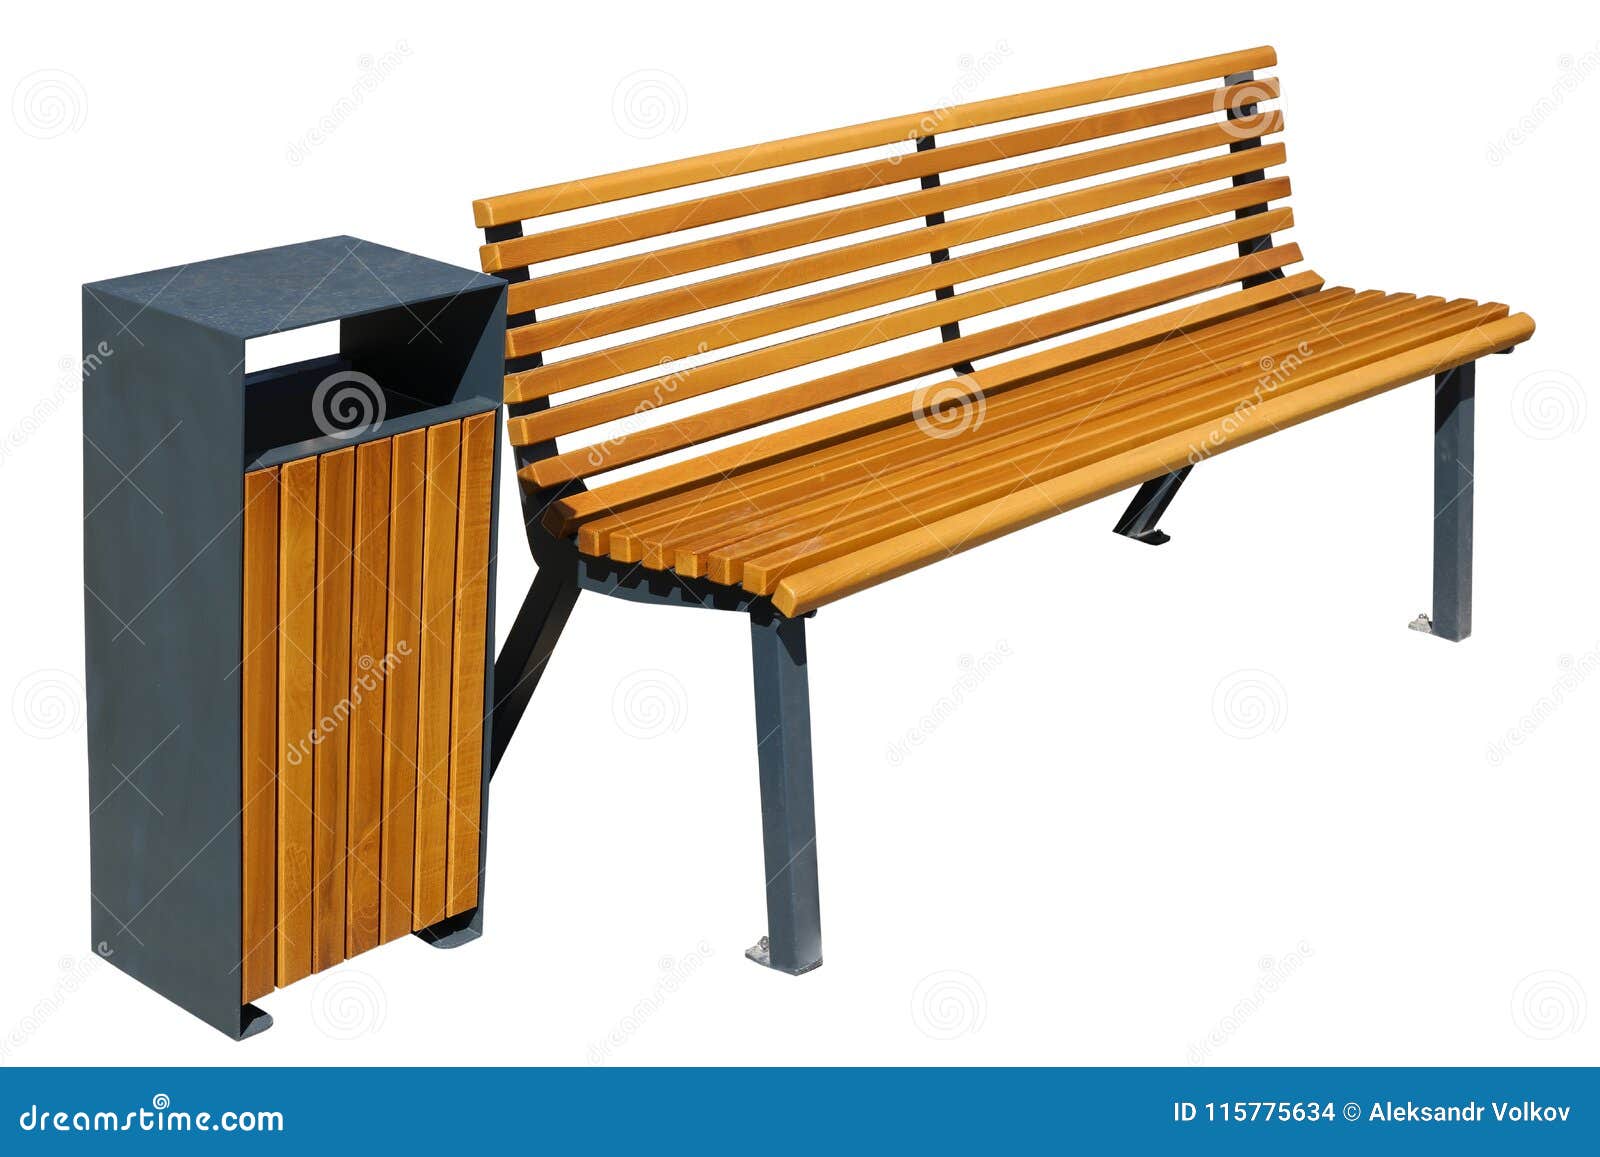 Wooden New Yellow Garden Bench With Metal Legs And Modrn Trash Stock Photo Image Of Garden